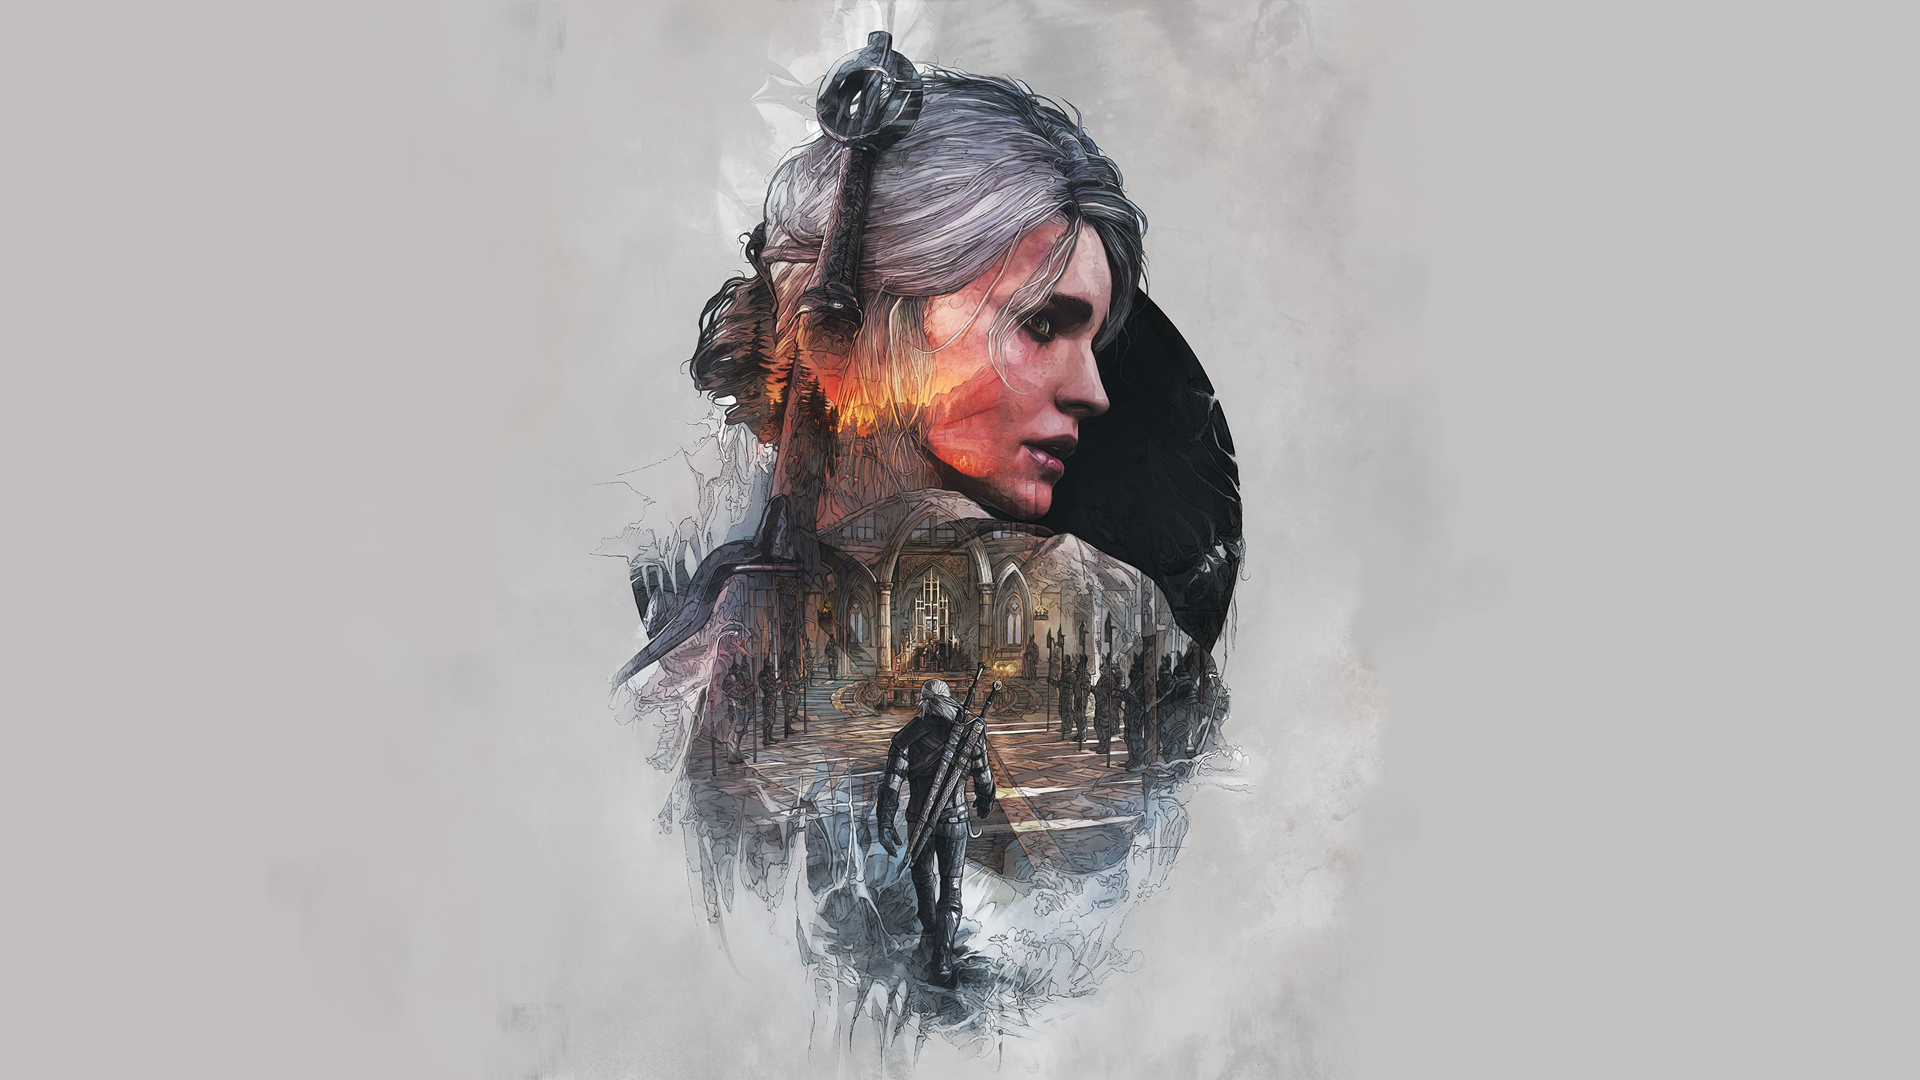 General 1920x1080 The Witcher 3: Wild Hunt Cirilla Fiona Elen Riannon The Witcher Geralt of Rivia video games video game characters